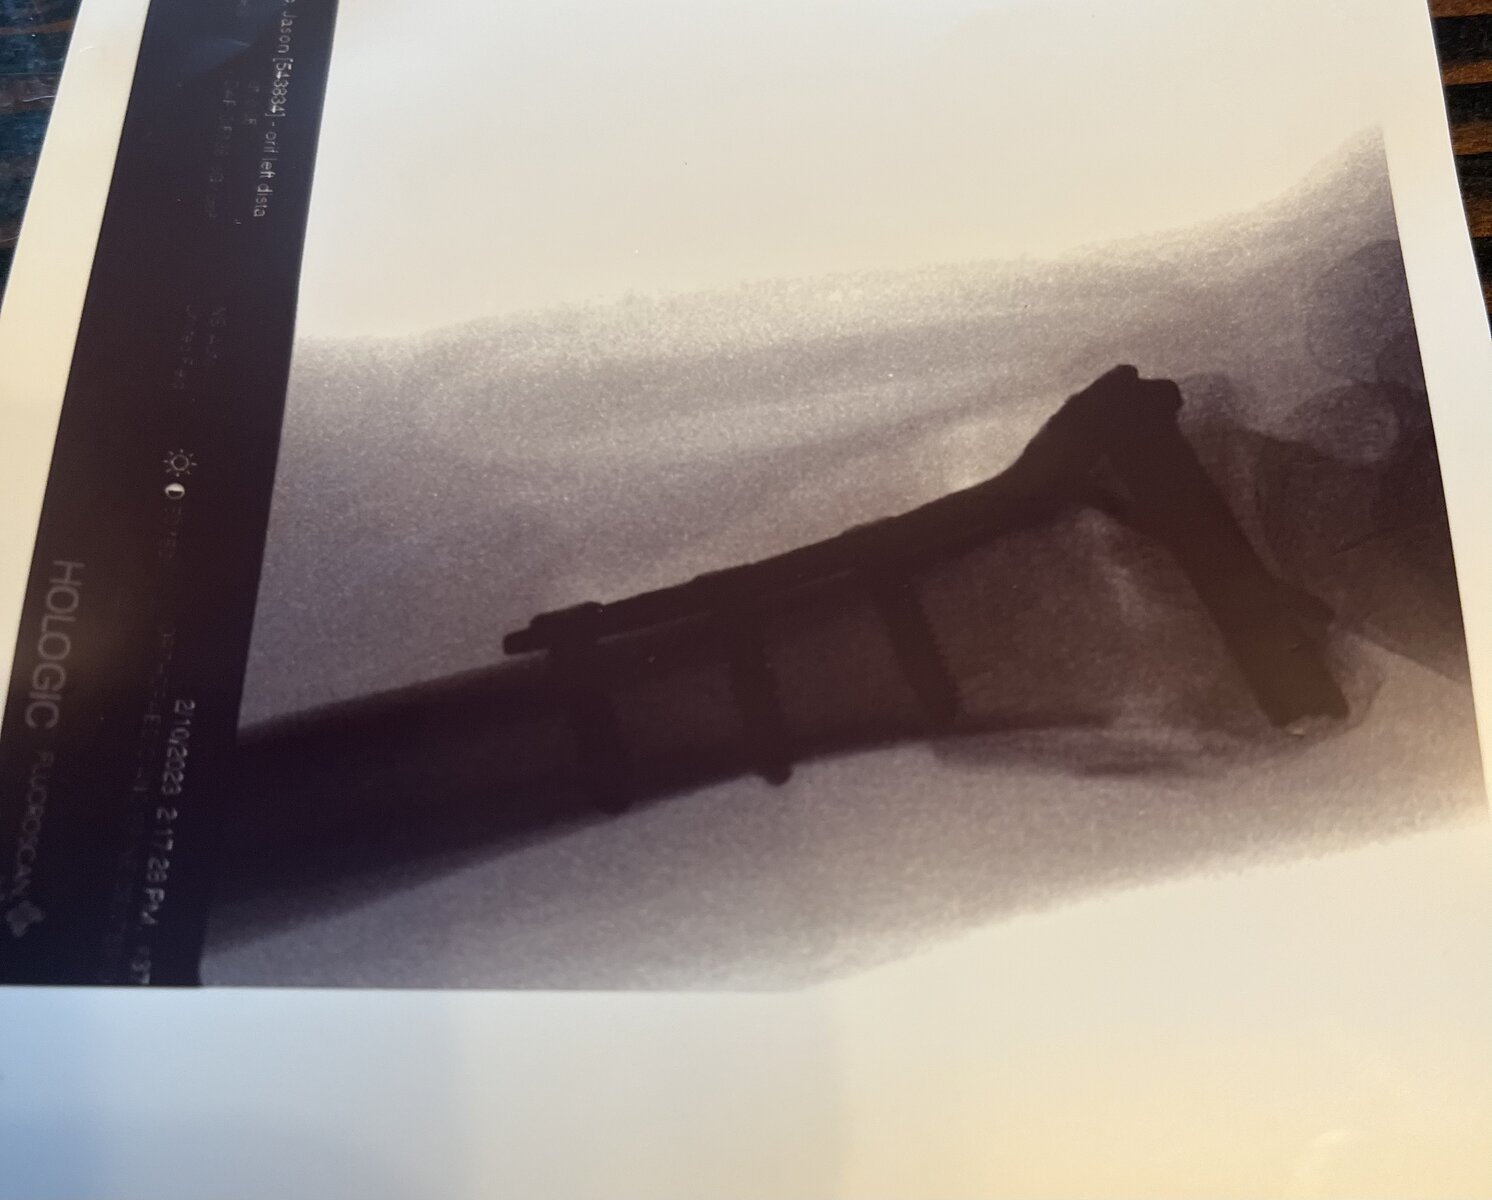 Forgot to post for a couple years… Whatta ride. ⚠️ Trigger warning: broken  bone X-rays if you're into that sorta thing. ⚠️